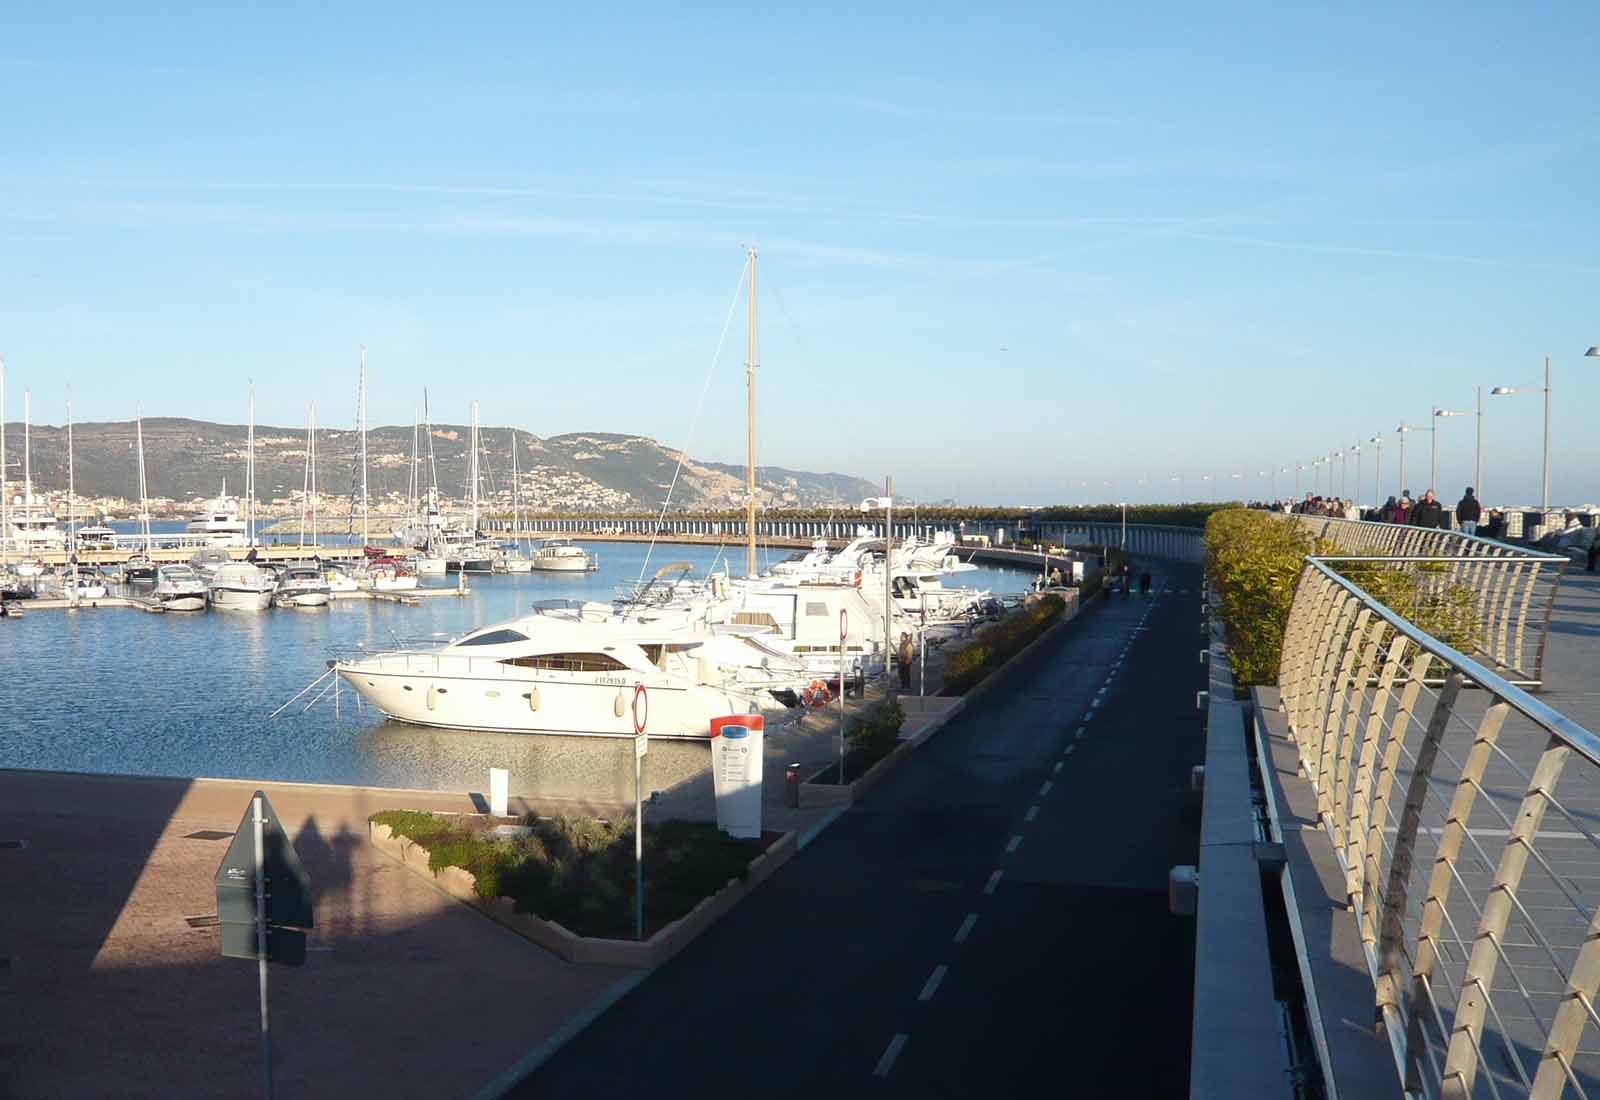 Expansion of the port of Loano - The breakwater pier